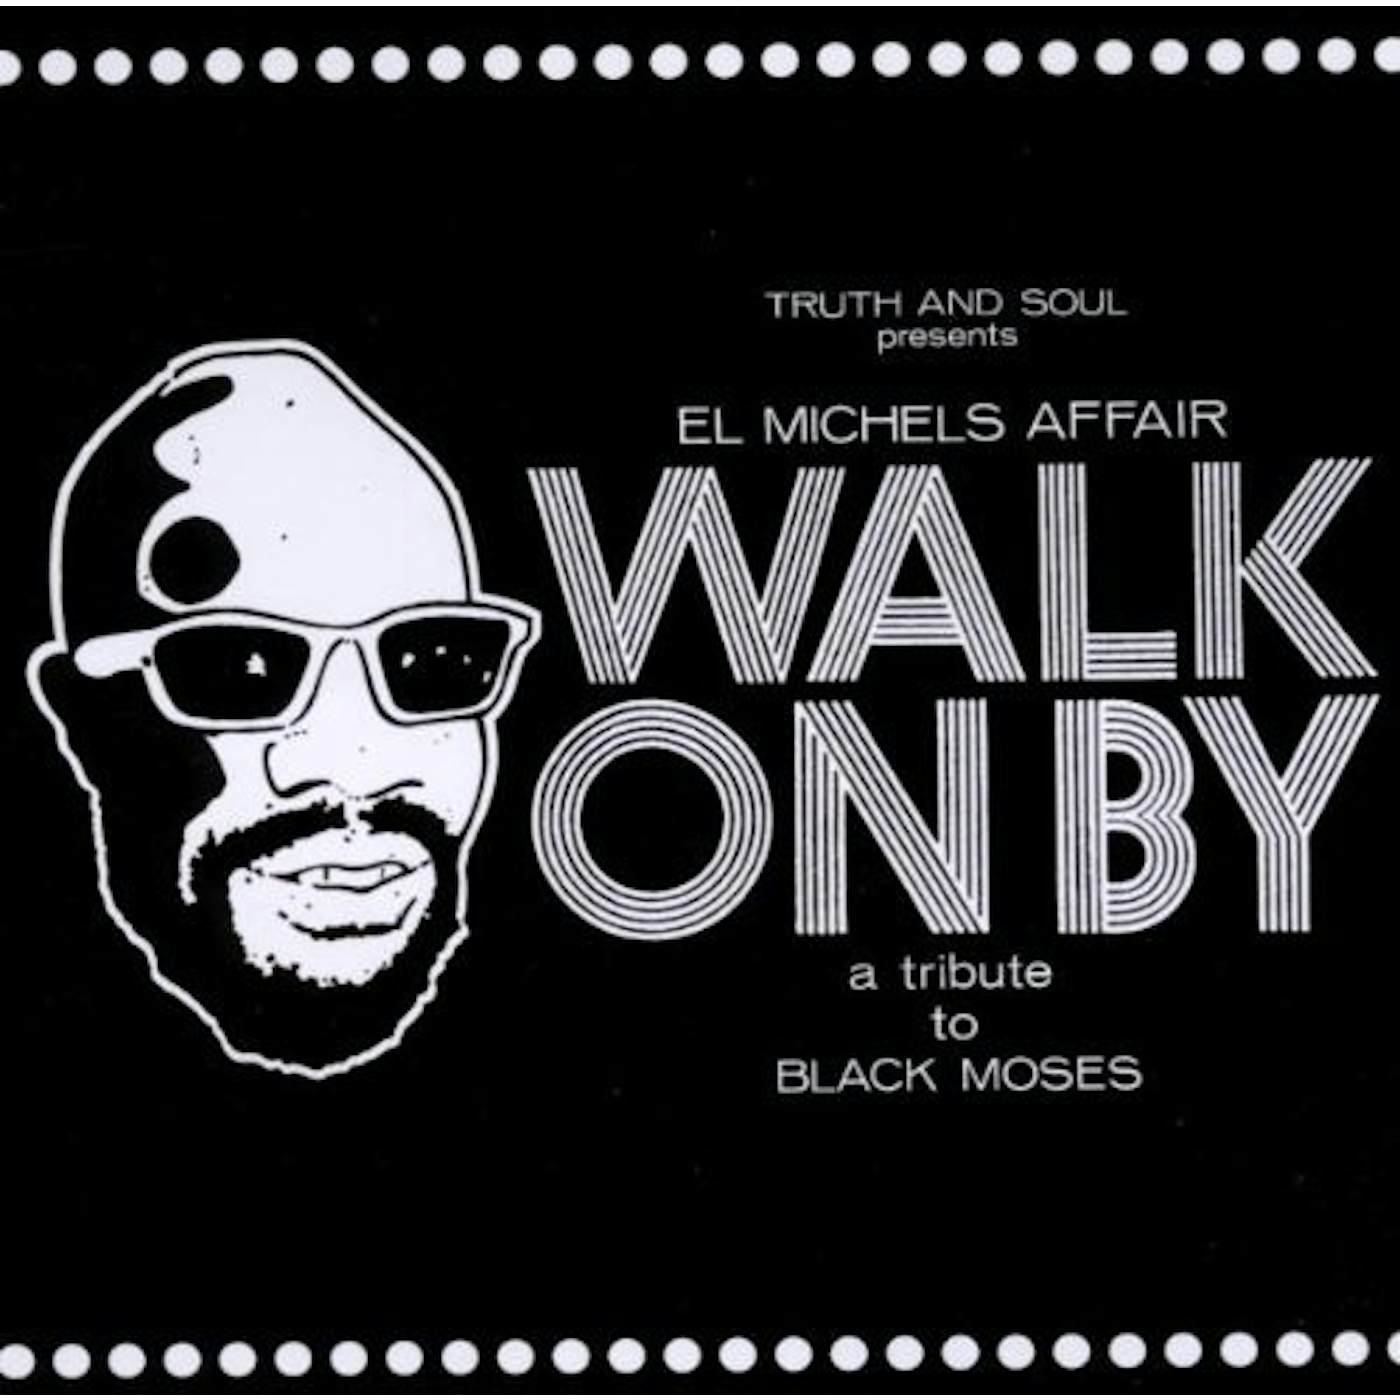 El Michels Affair WALK ON BY: A TRIBUTE TO BLACK MOSES Vinyl Record